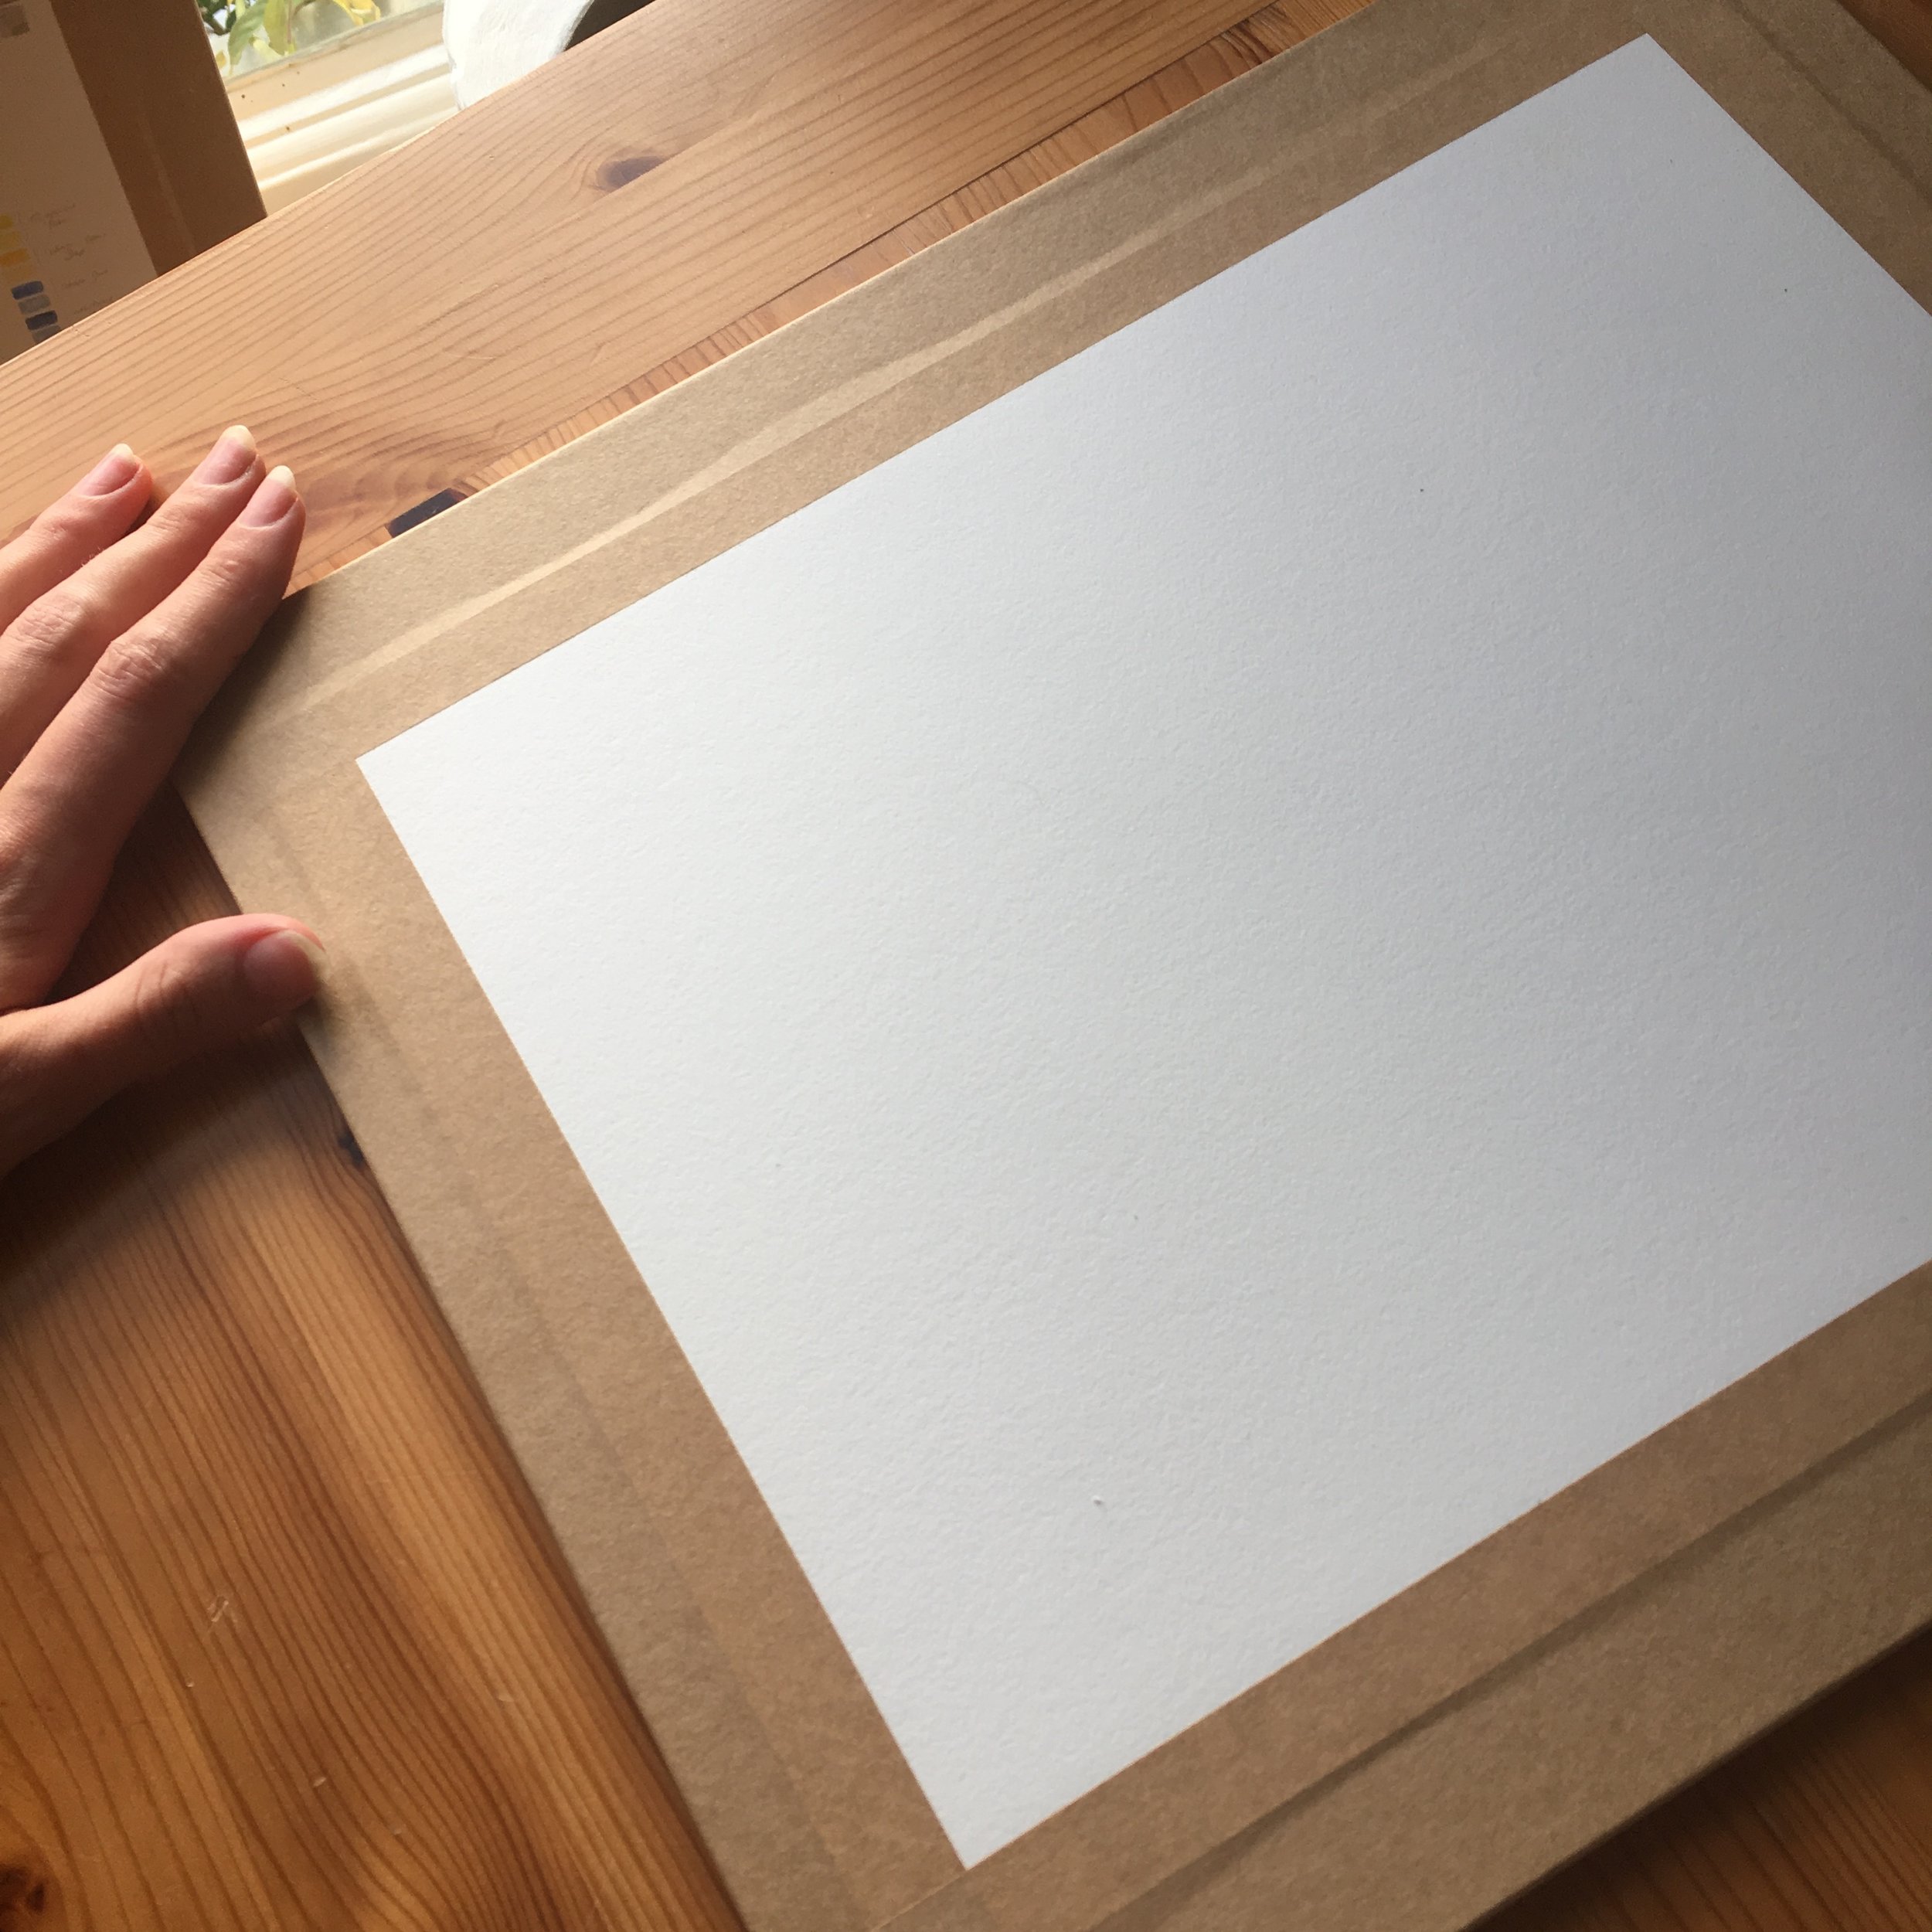 The importance of stretching watercolour paper